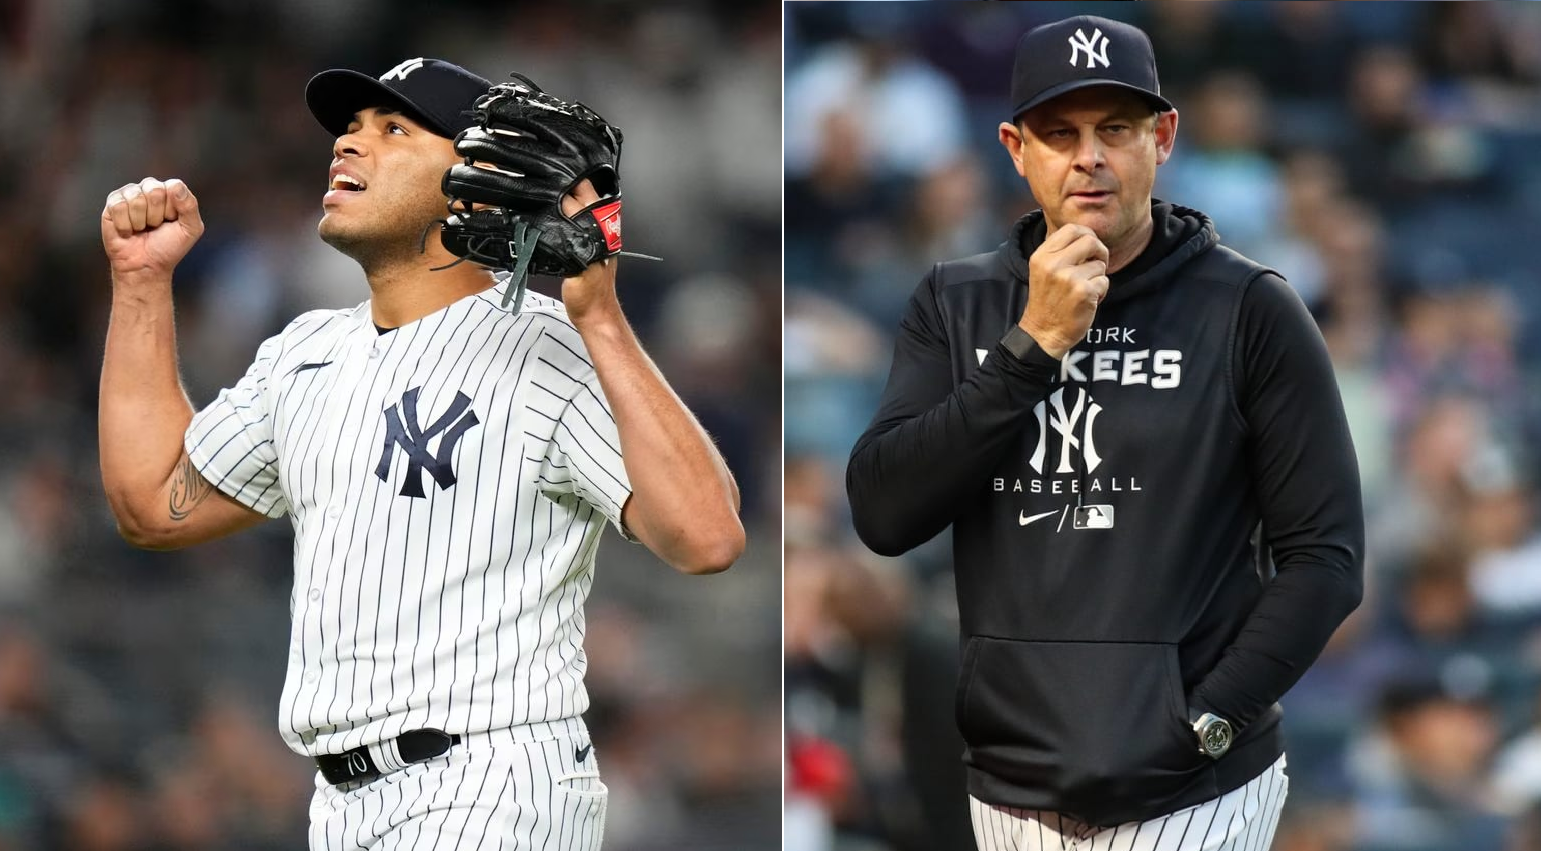 Jimmy Cordero: New York Yankees pitcher suspended for the season